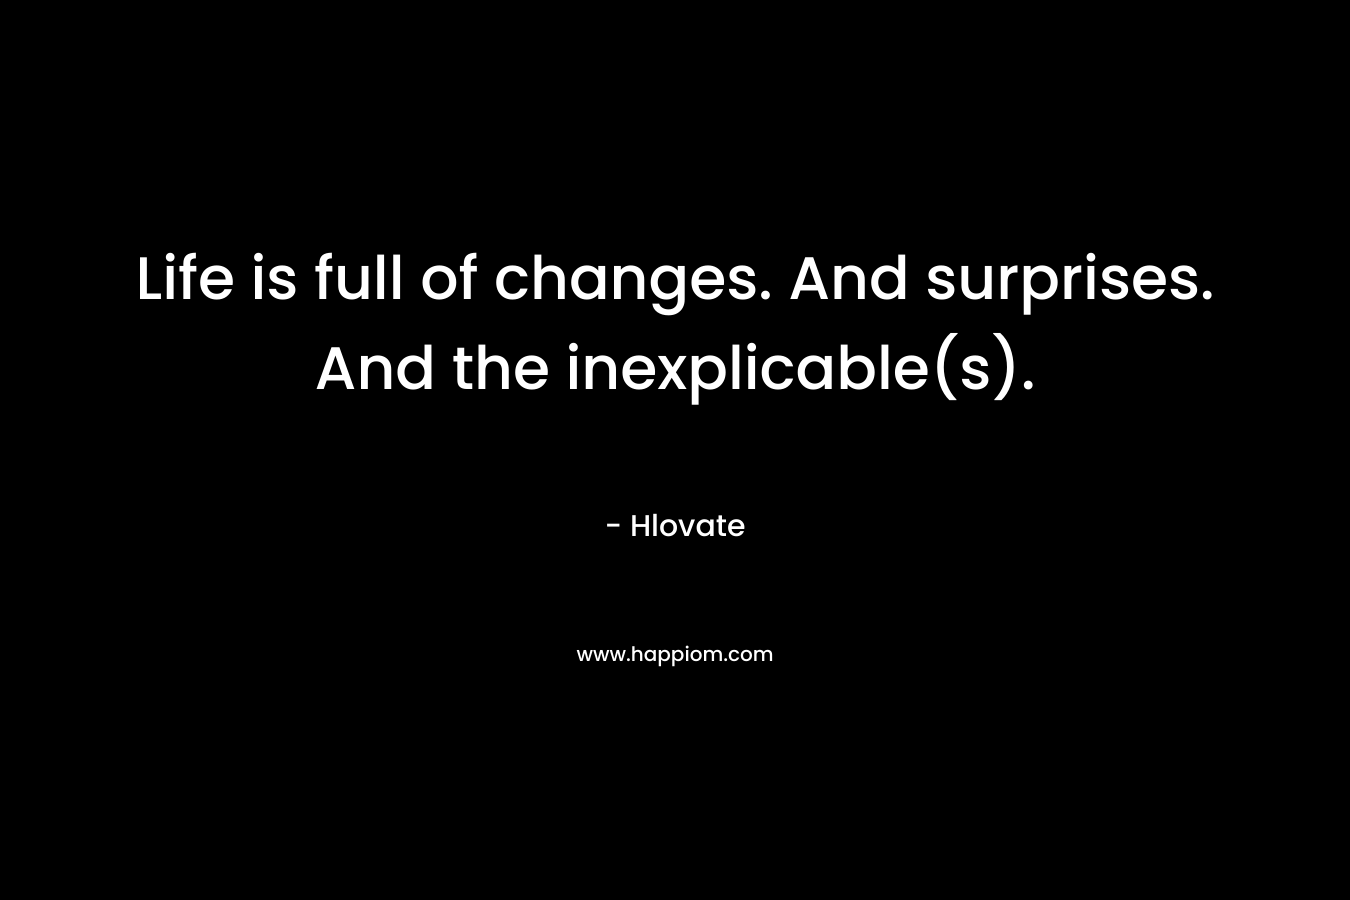 Life is full of changes. And surprises. And the inexplicable(s).